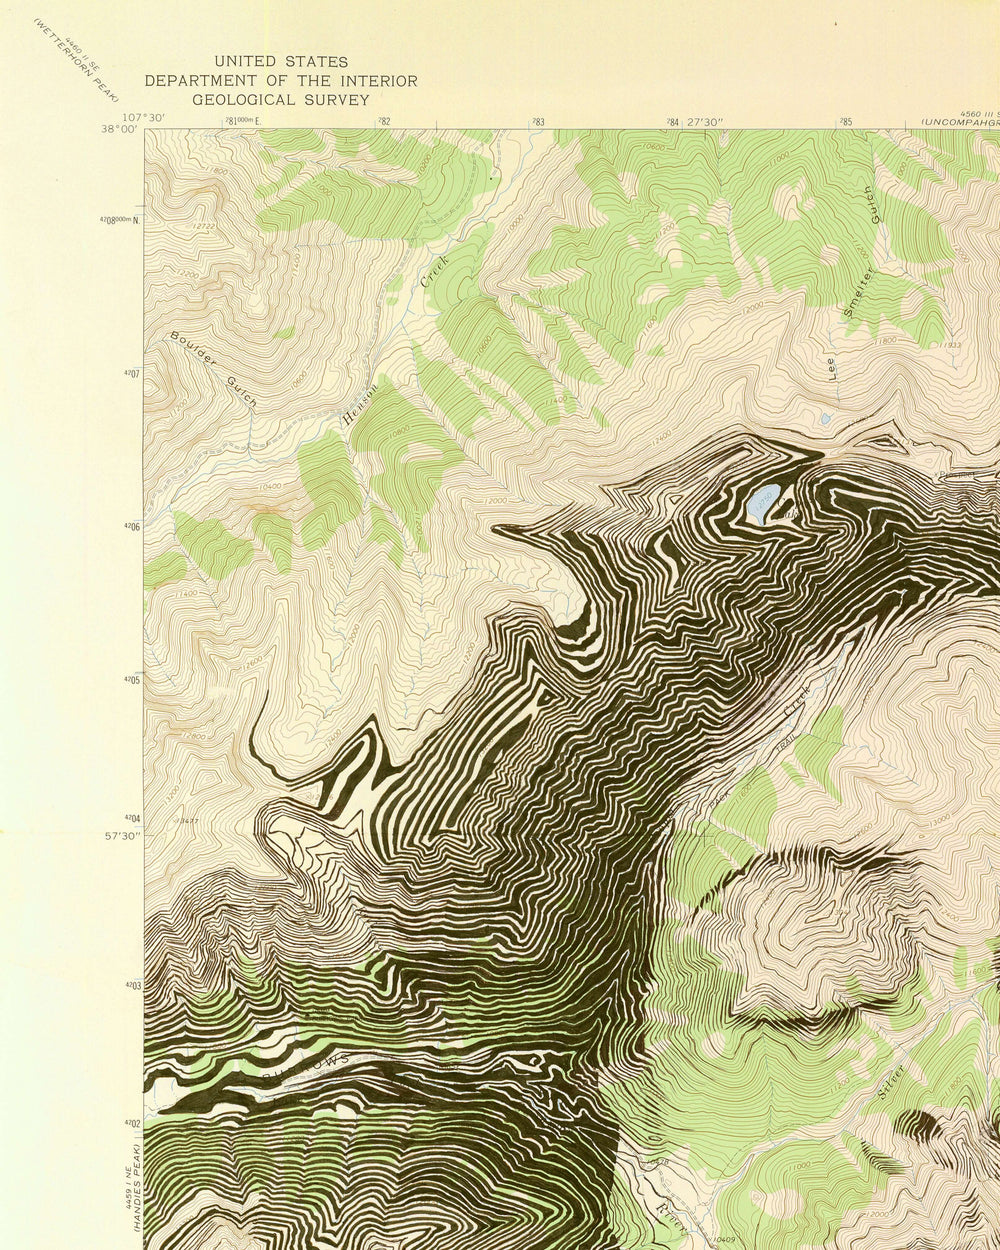 A limited edition Ed Fairburn | "San Juan Mountains" map featuring a woman's face inspired by the San Juan Mountains.